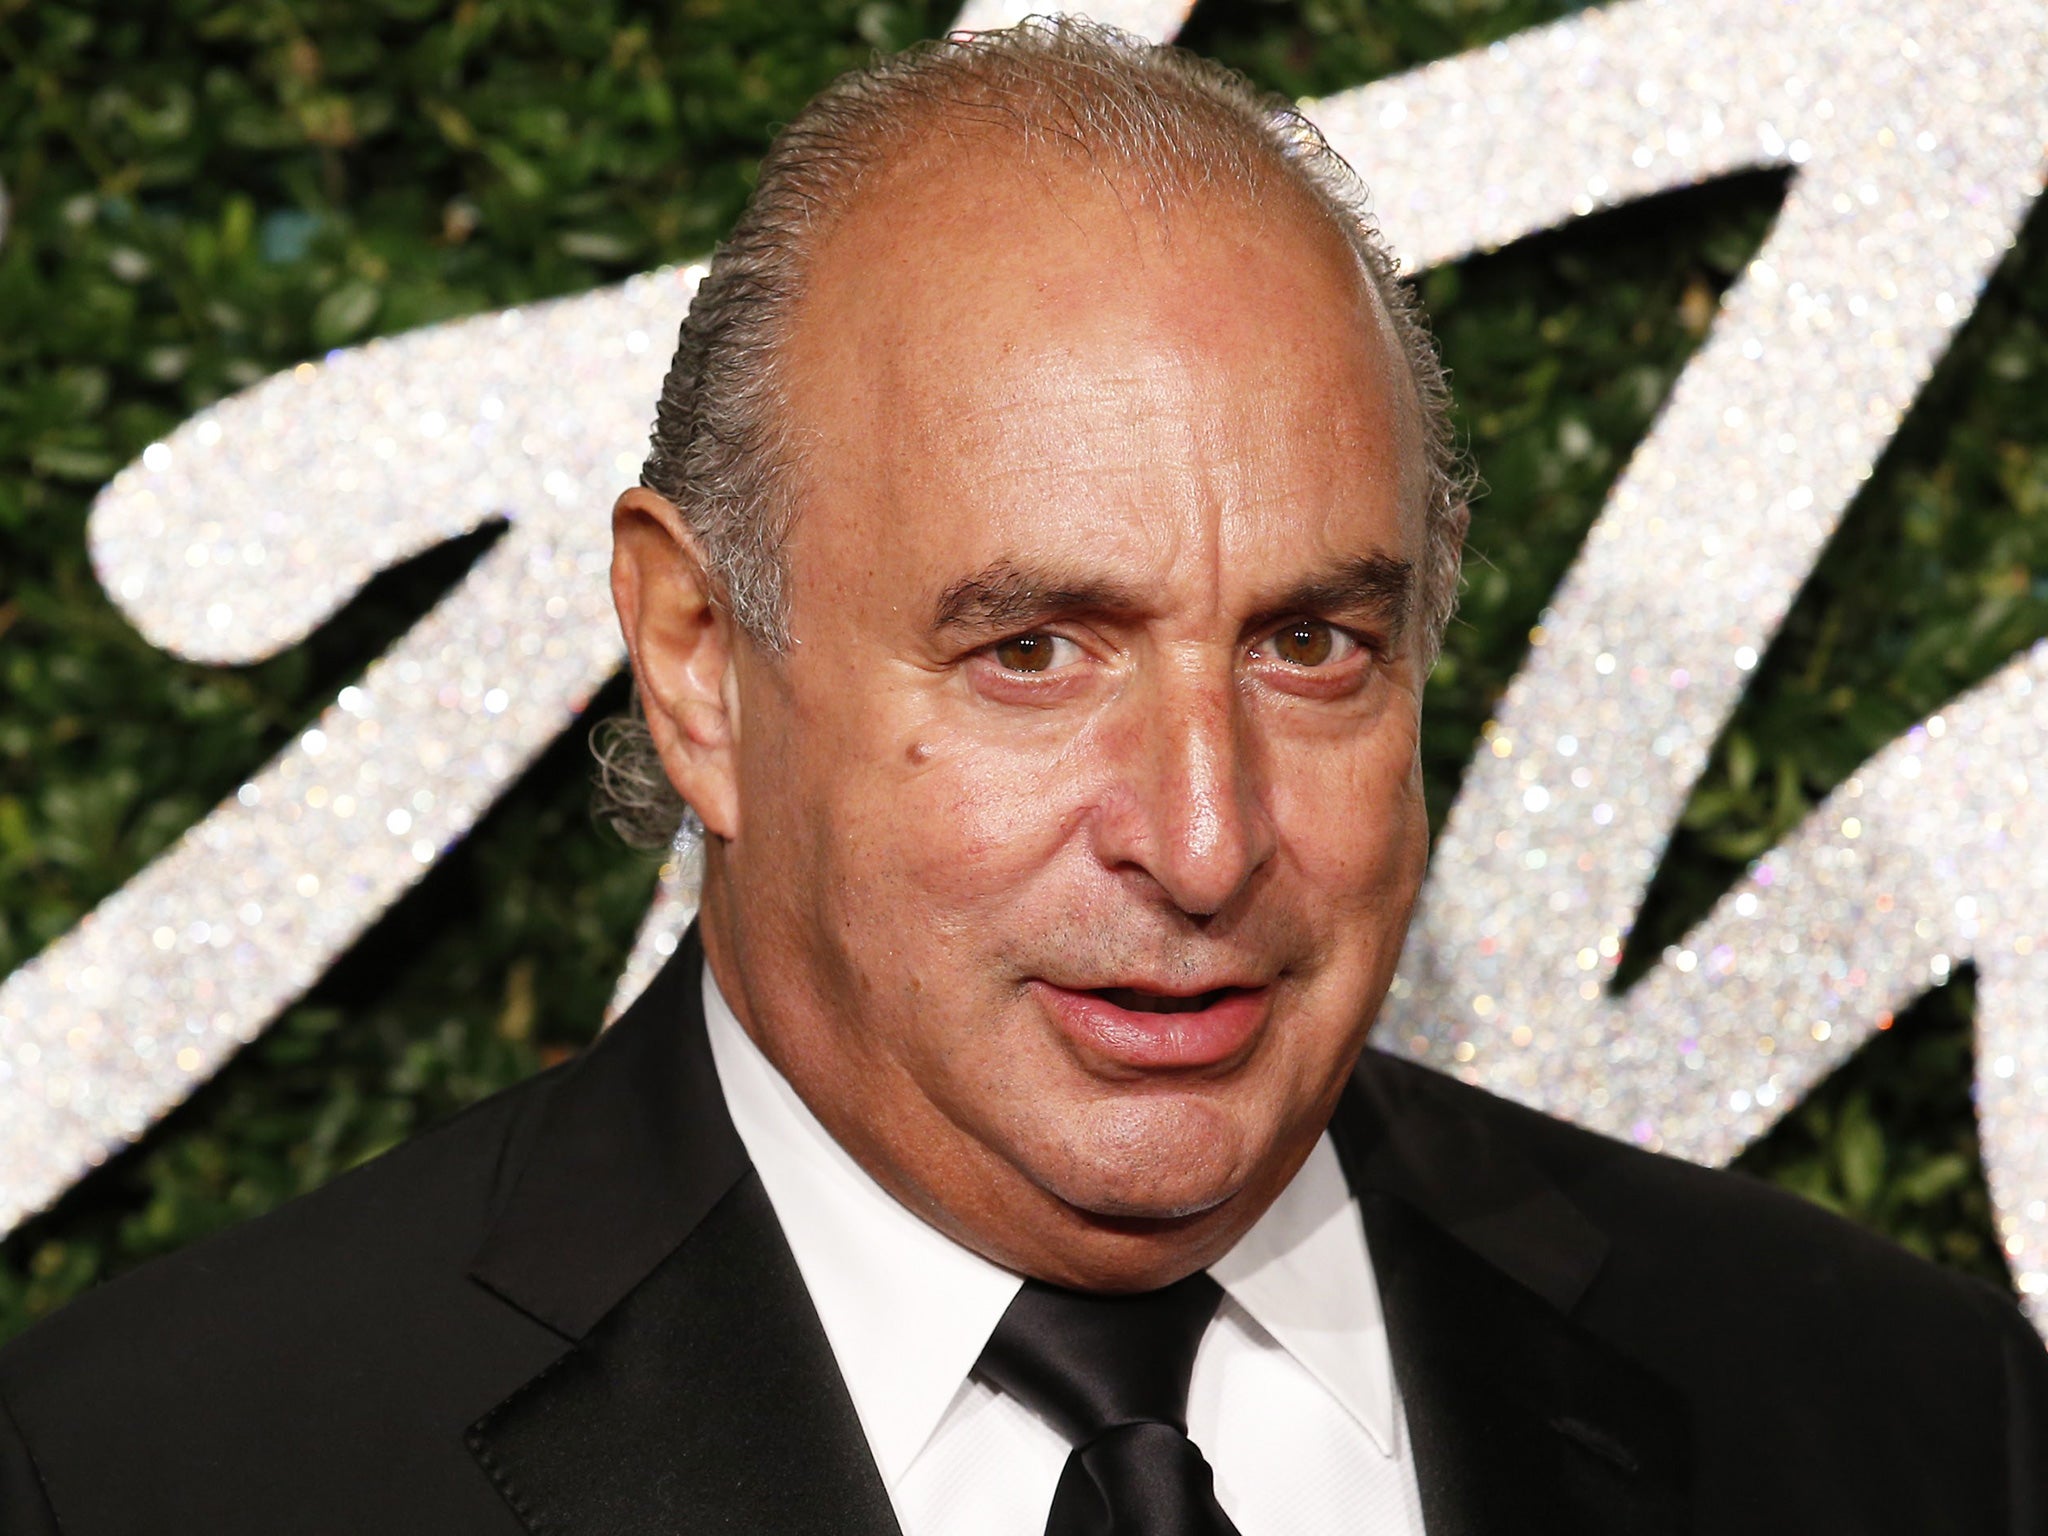 Sir Philip Green will be quizzed in Parliament about the BHS pension scheme